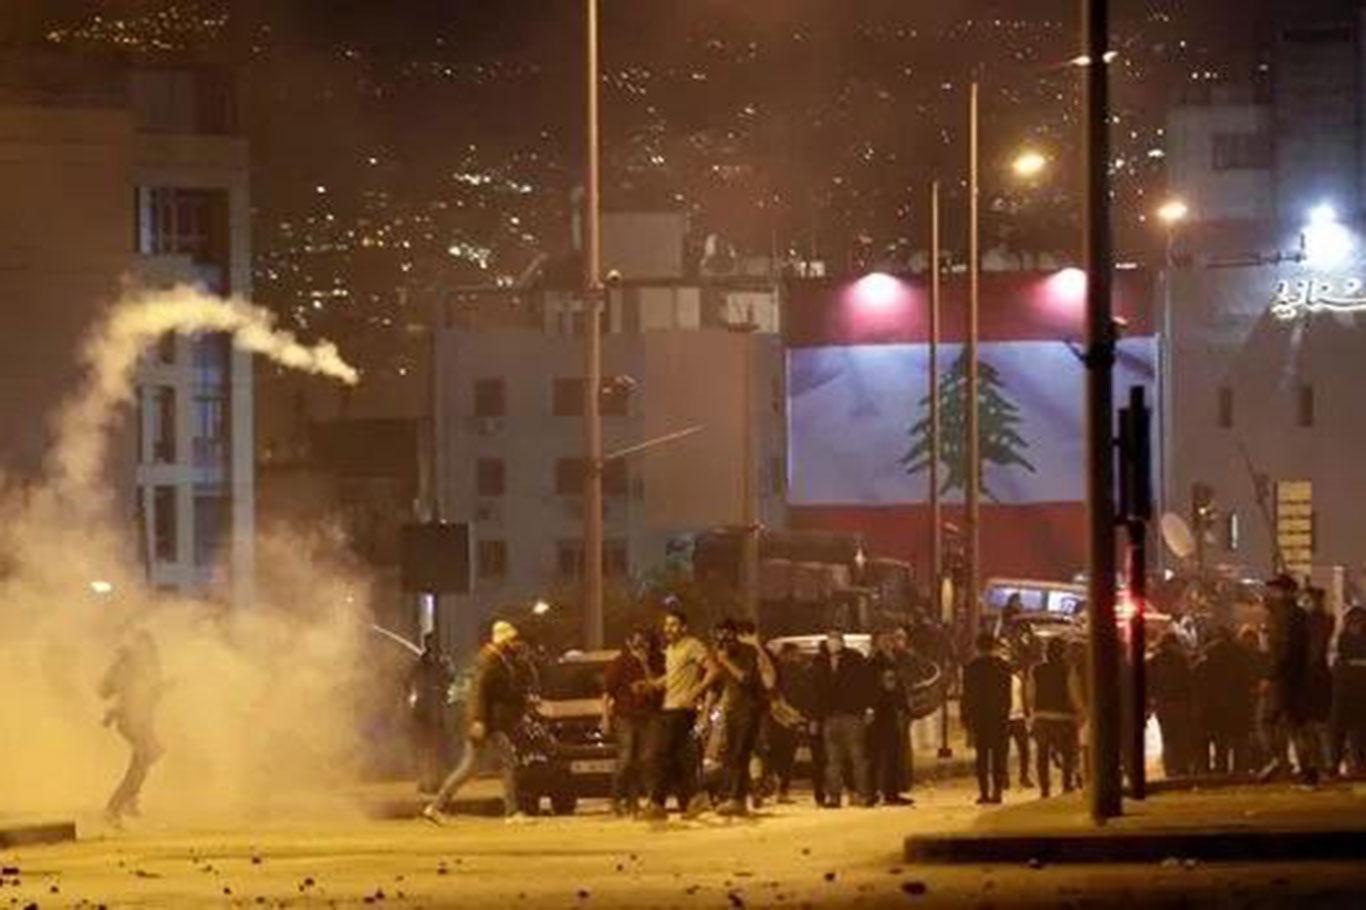 At least 46 people injured as police clash with protesters in Lebanon